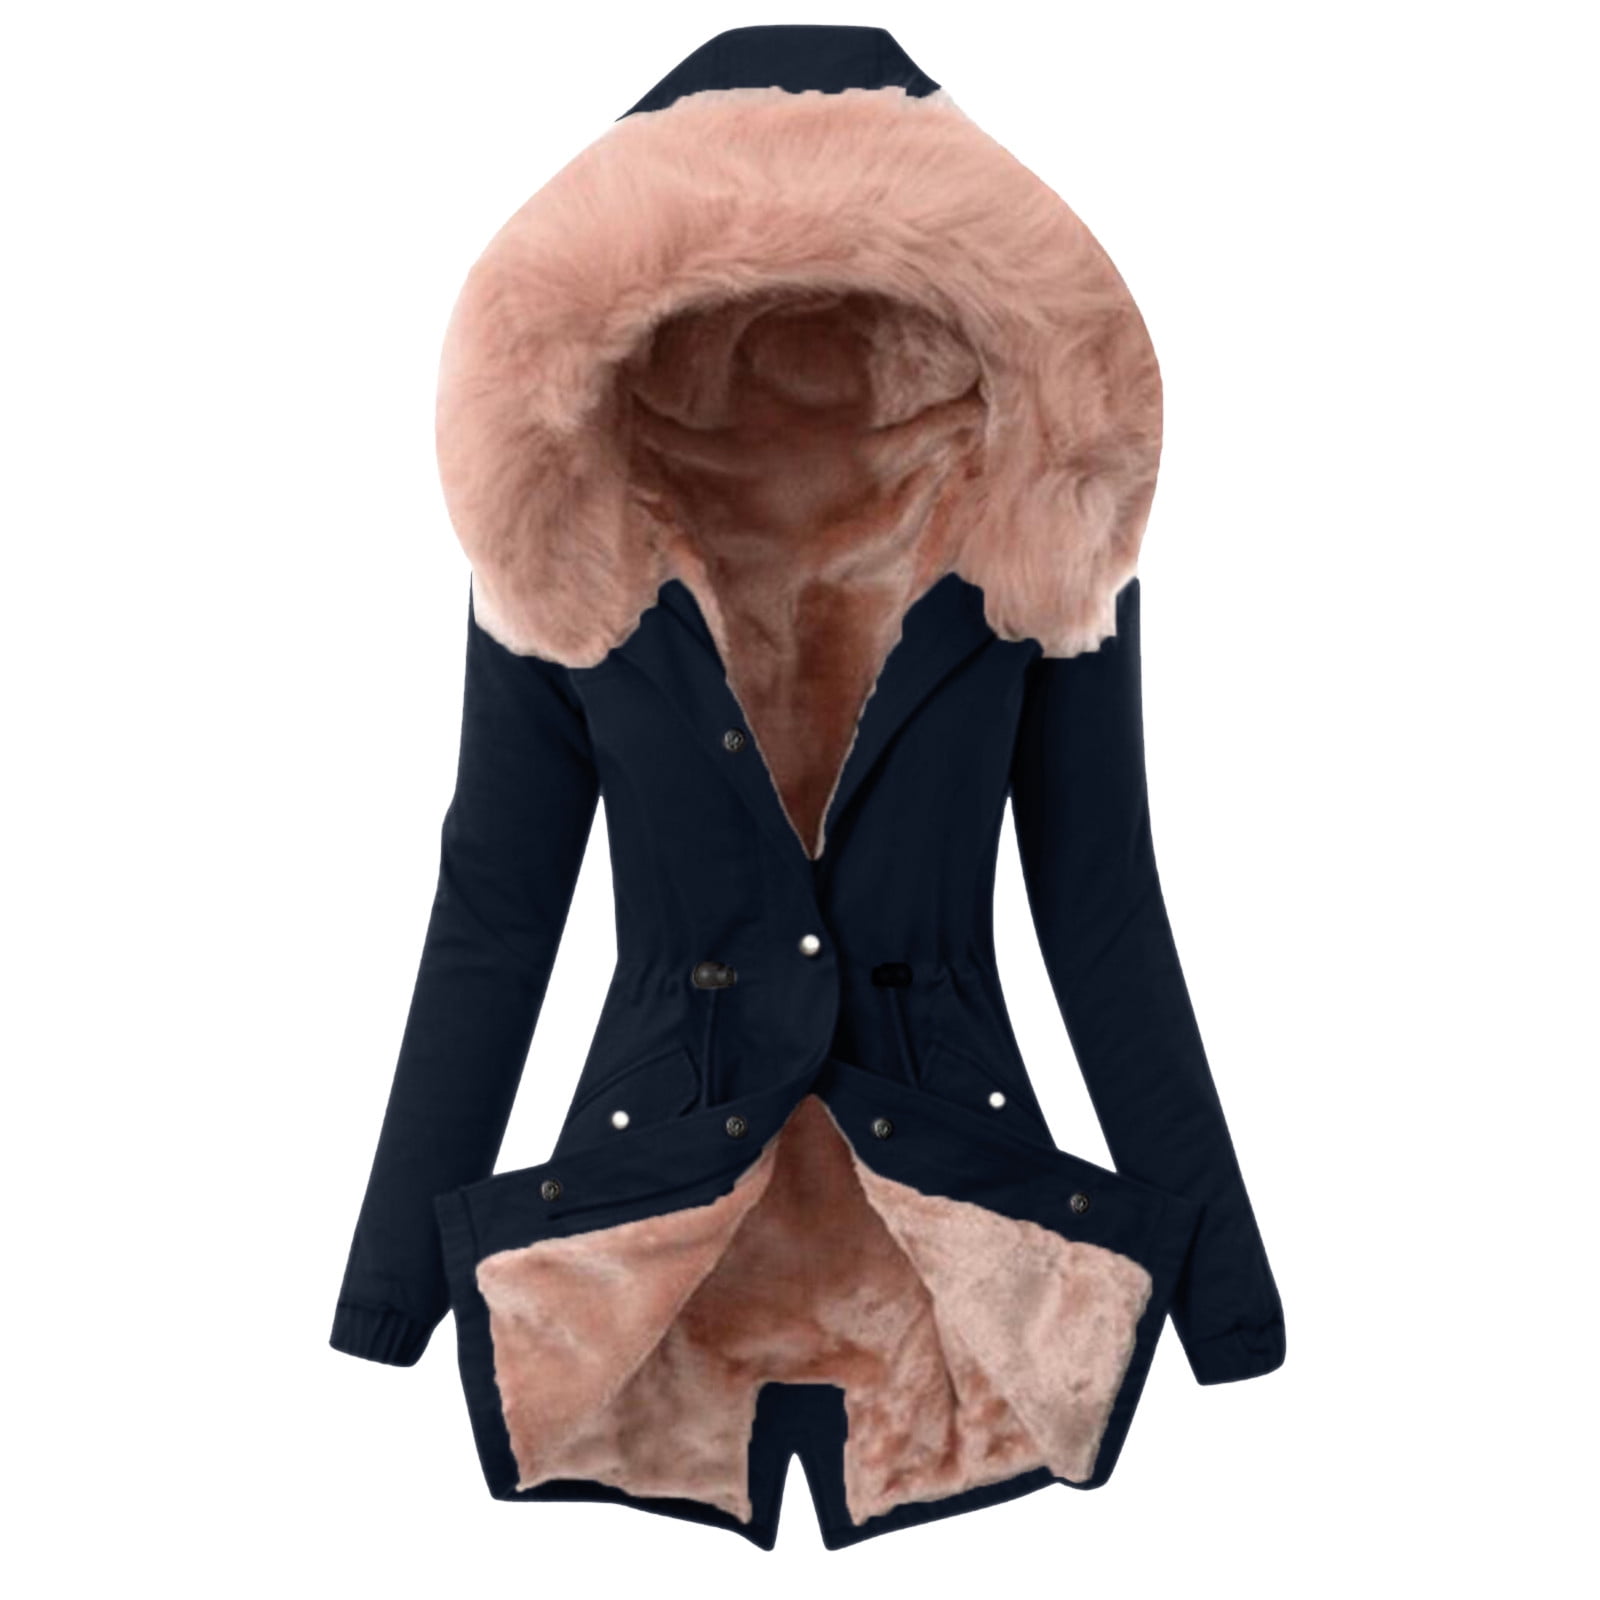  wjiNFDFG Women Plus Size Daily Winter Coat Lapel Collar Long  Sleeve Jacket Vintage Thicken Coat Jacket Warm Hooded Thick (A, M) :  Clothing, Shoes & Jewelry